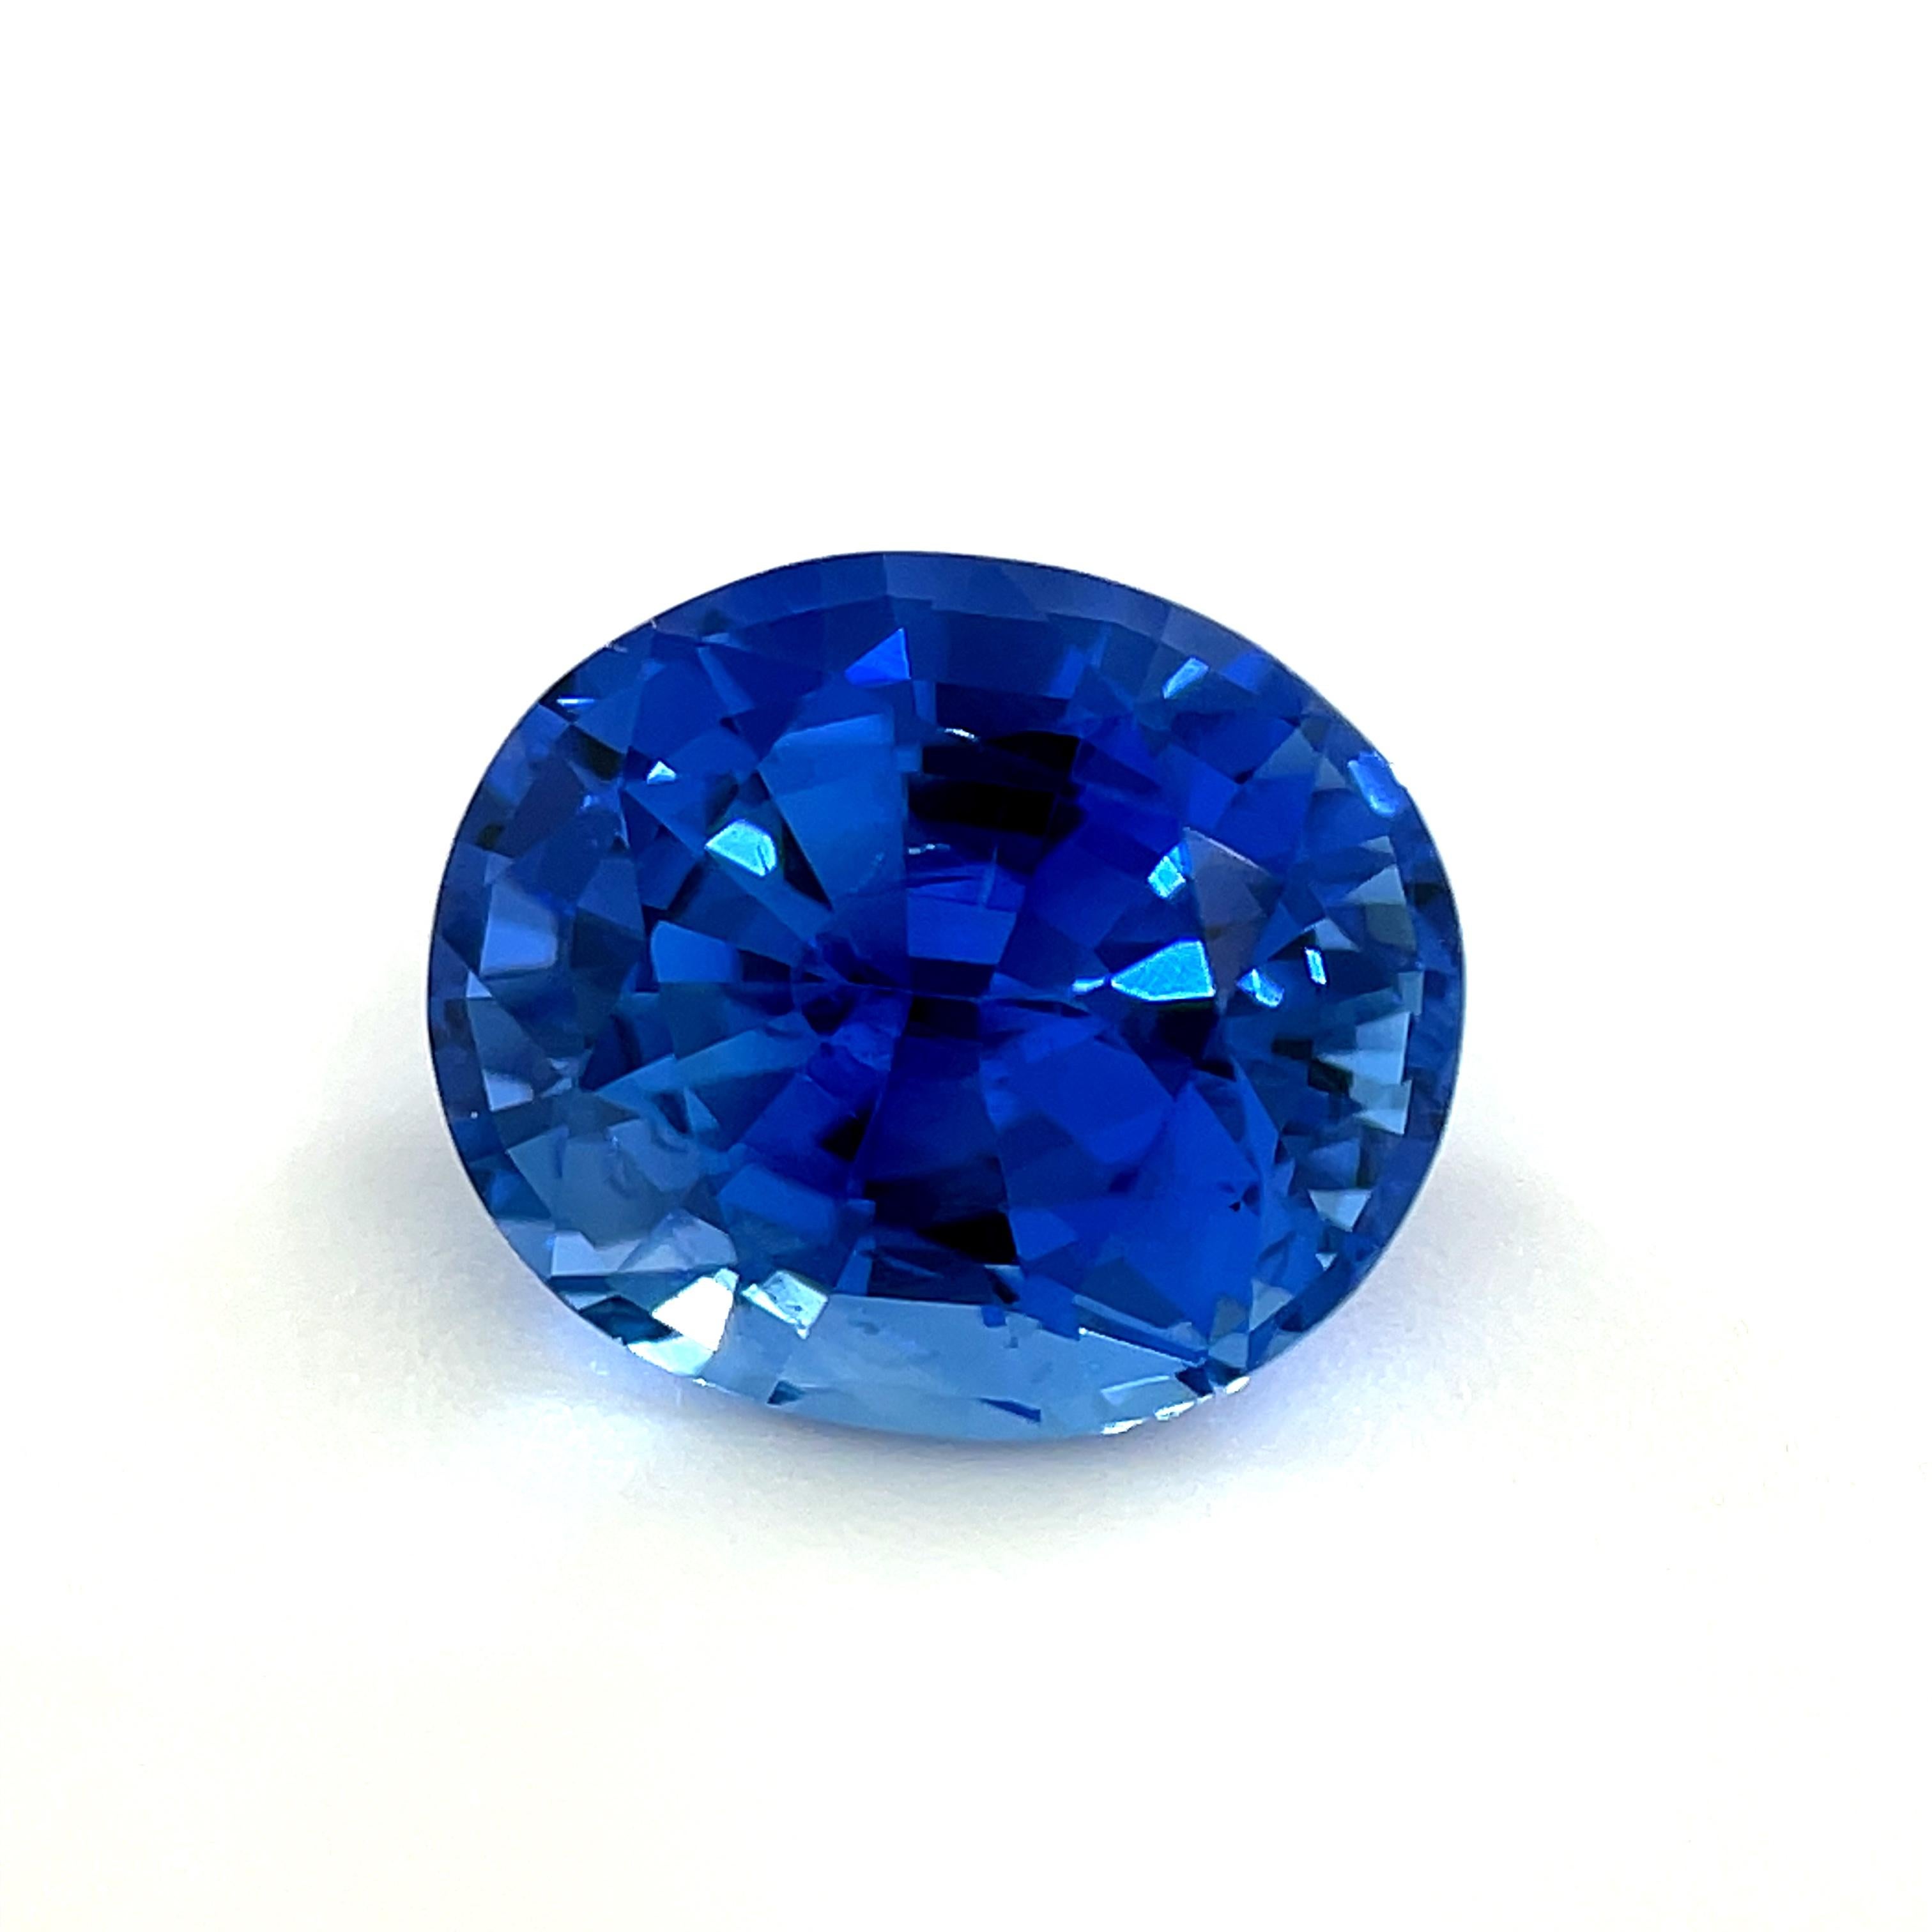 This beautiful 2.39 carat unheated loose blue sapphire is absolutely stunning! It is a perfectly proportioned oval from Madagascar with bright medium royal blue color. It is very rare to find an unheated blue sapphire, as most must be heated in